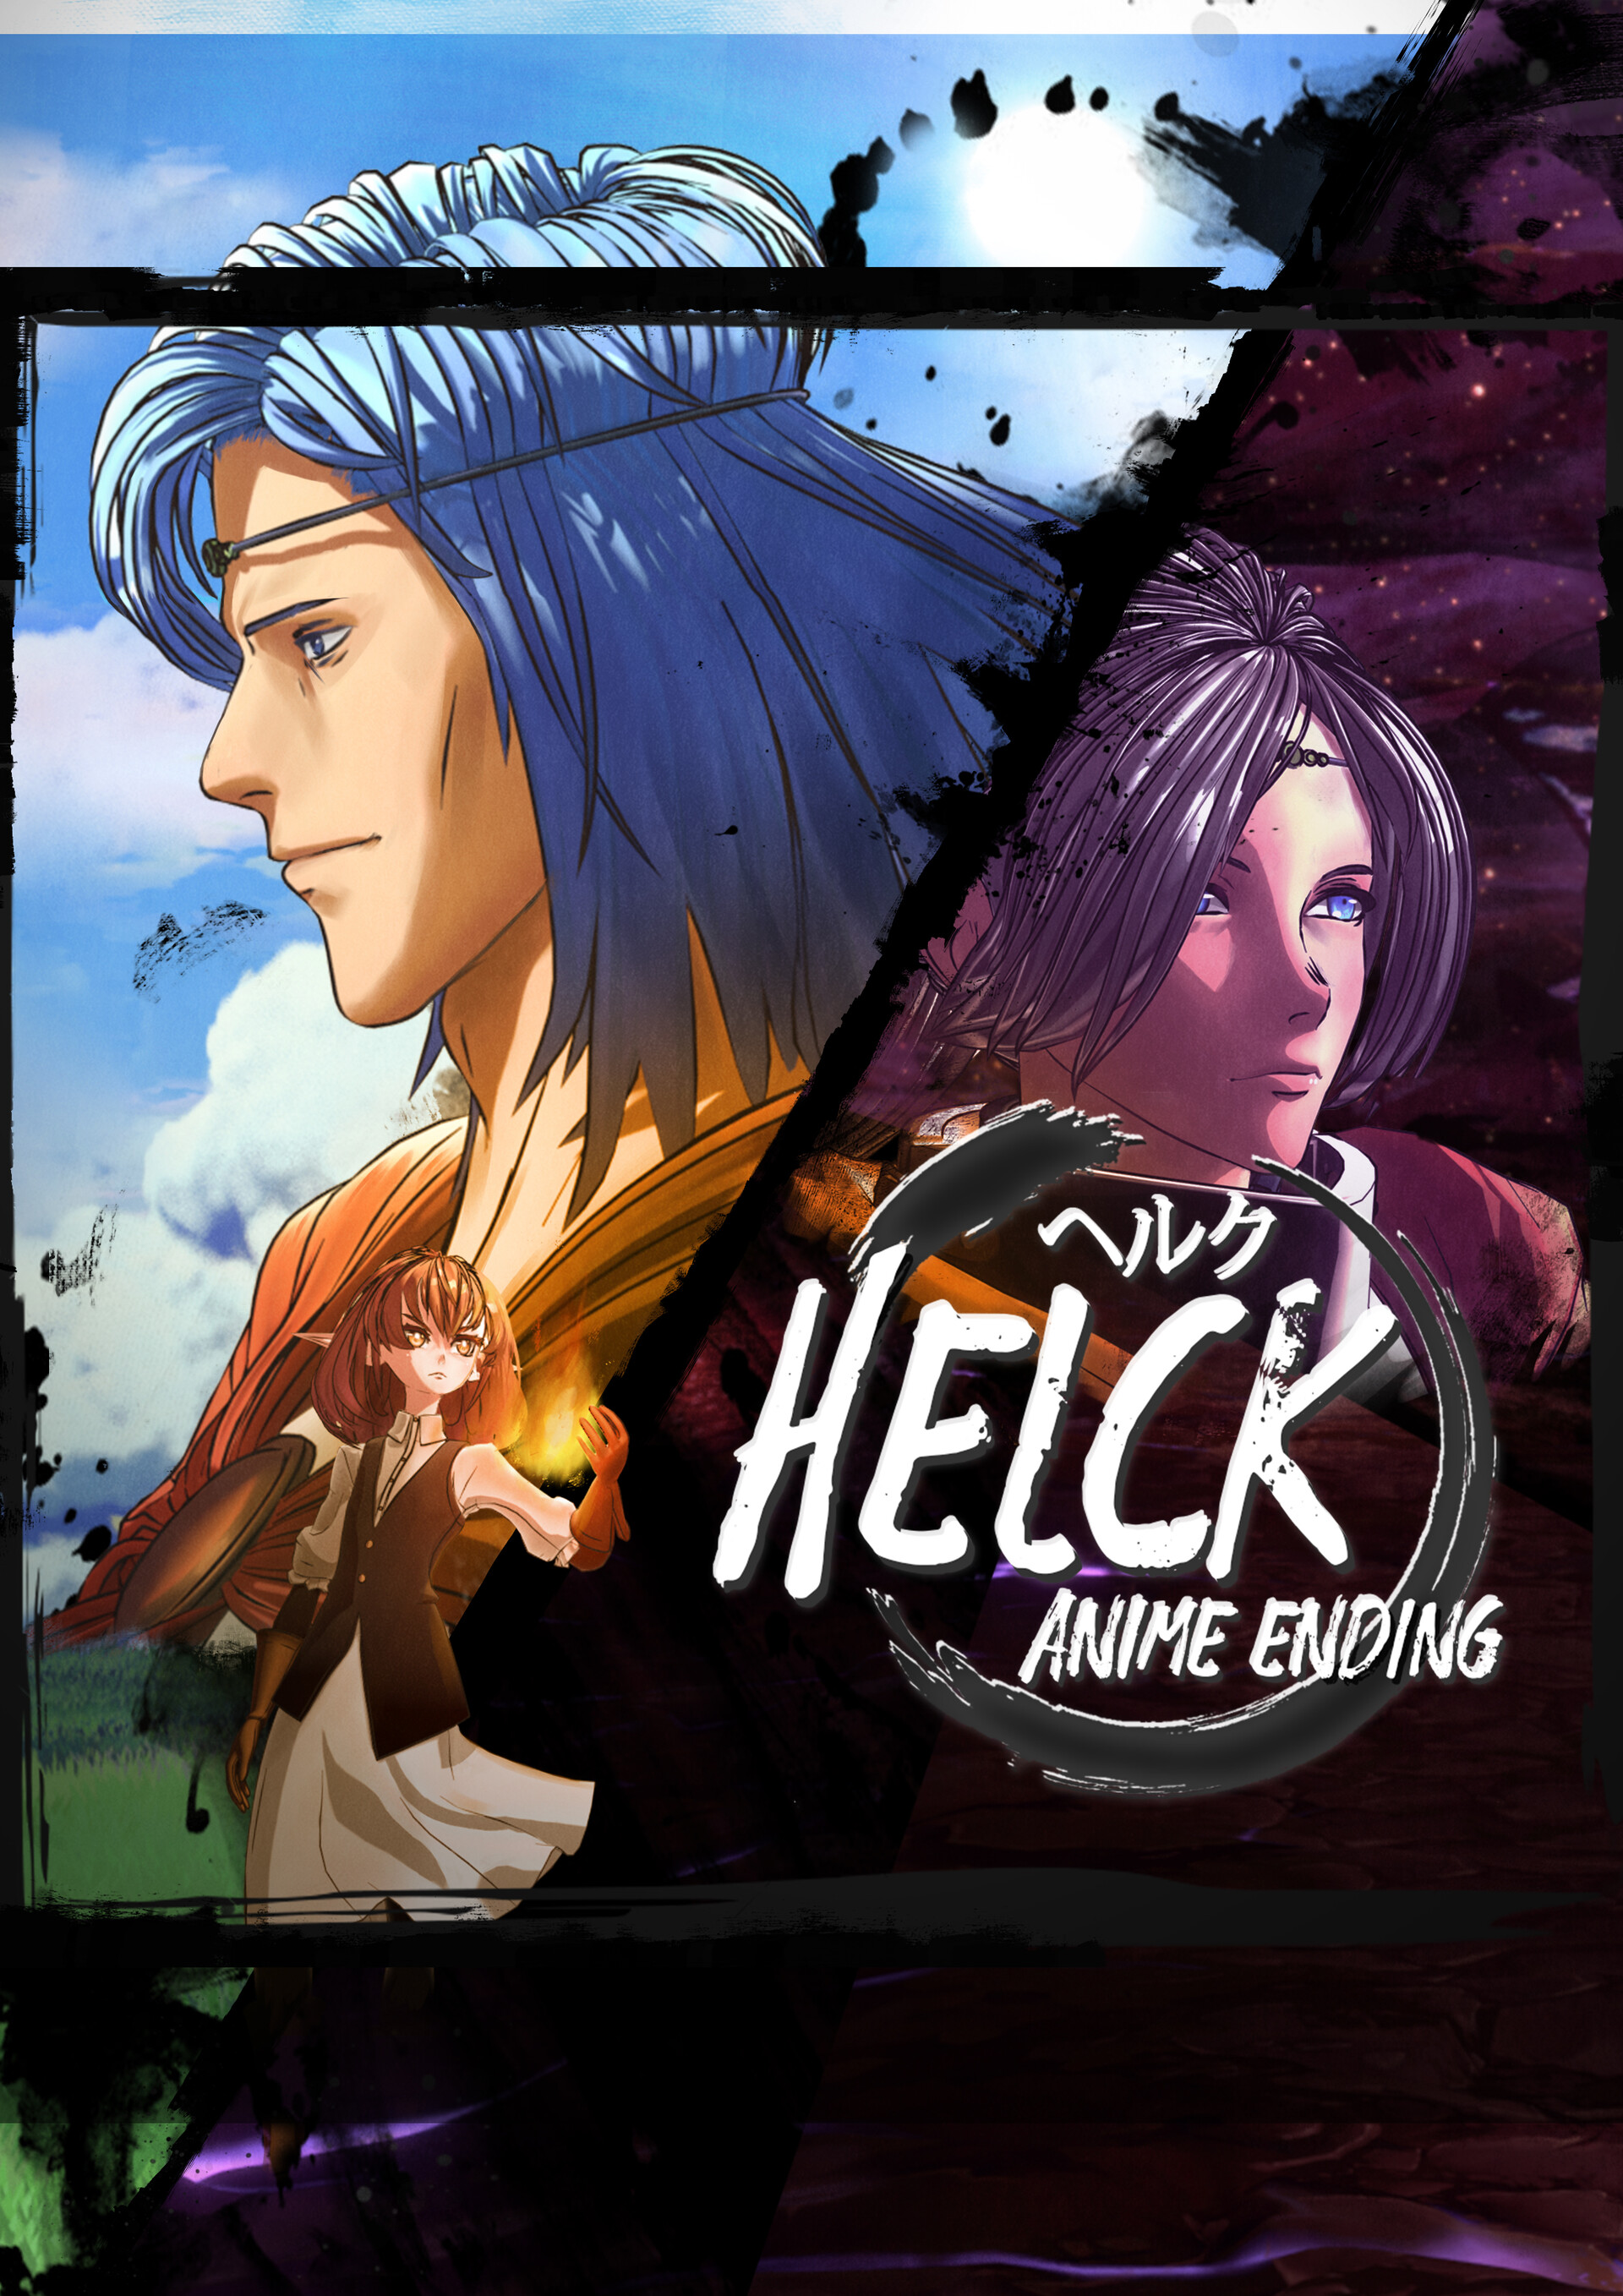 Helck Vol 4  Book by Nanaki Nanao  Official Publisher Page  Simon   Schuster